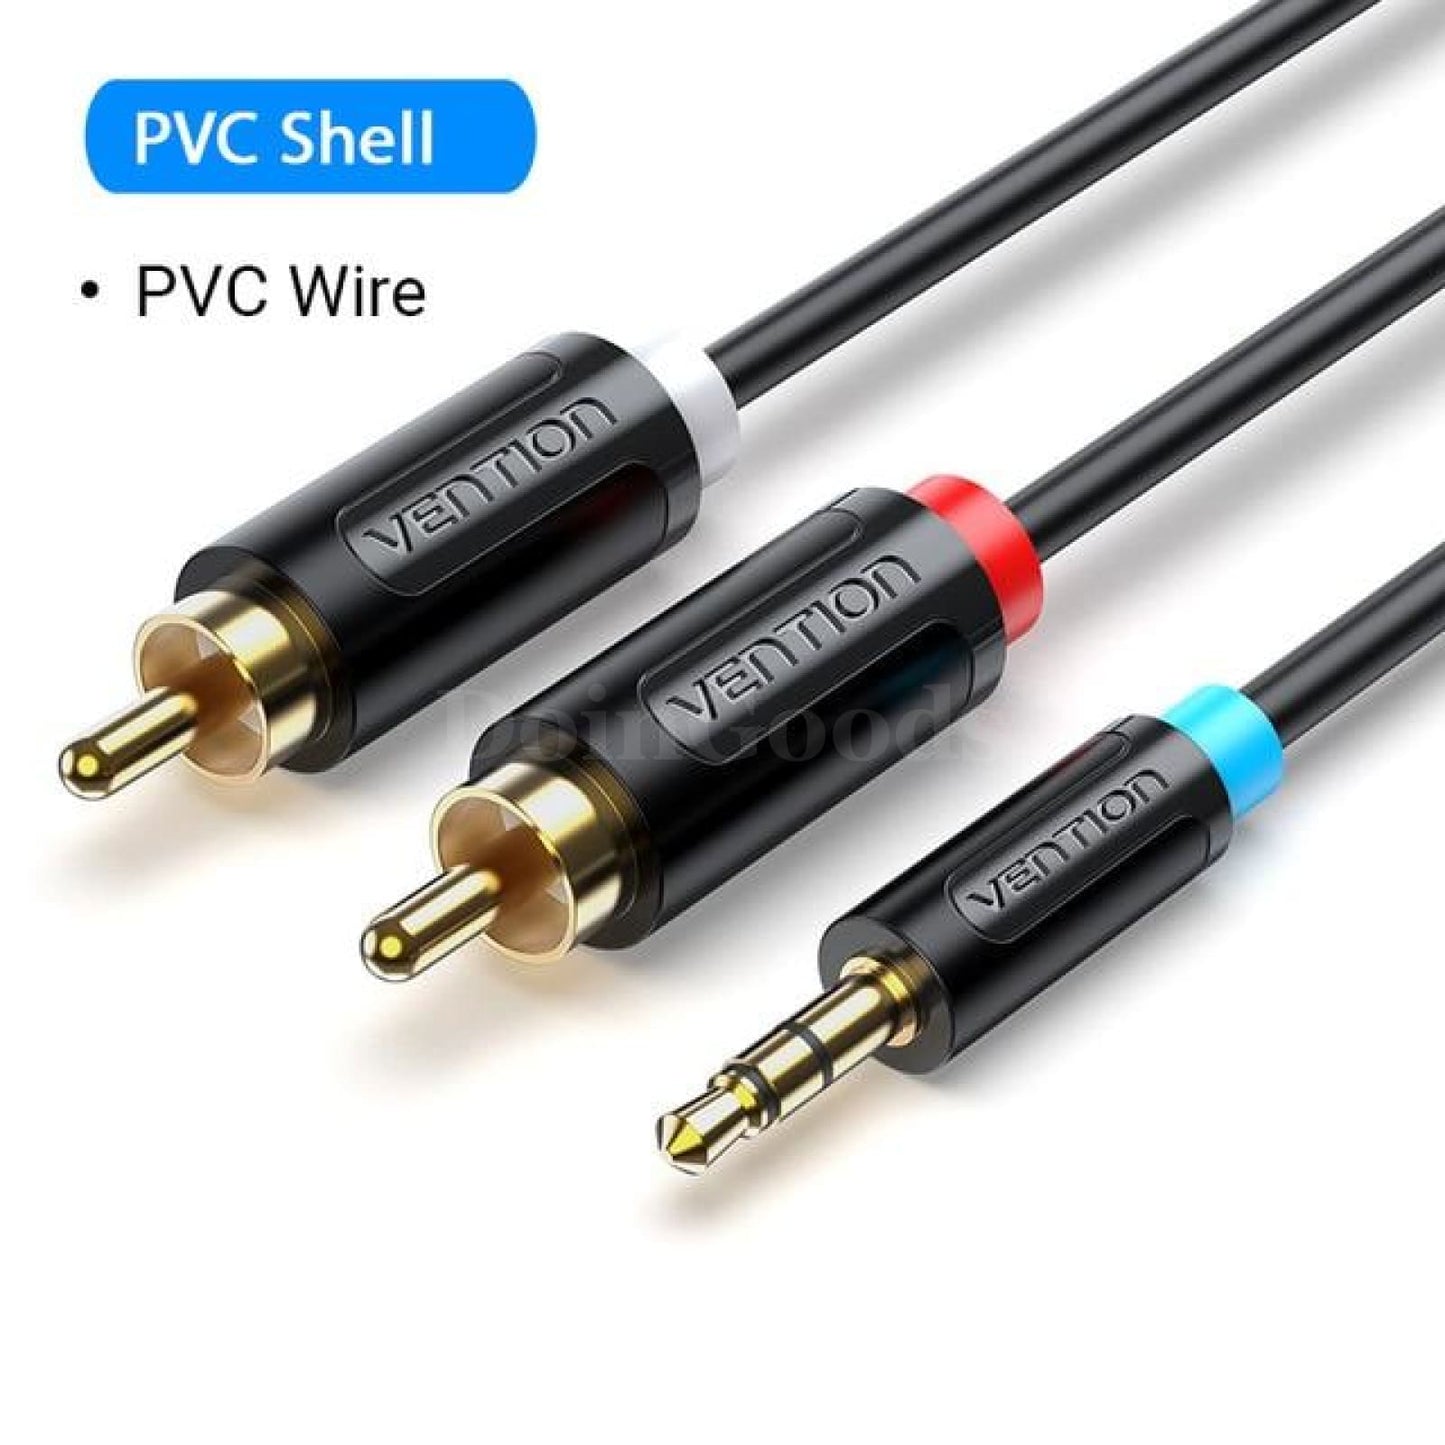 Vention Rca 3.5 To Audio Jack For Phone Edifer Home Theater Dvd Male Aux Cable Pvc Shell / 0.5M